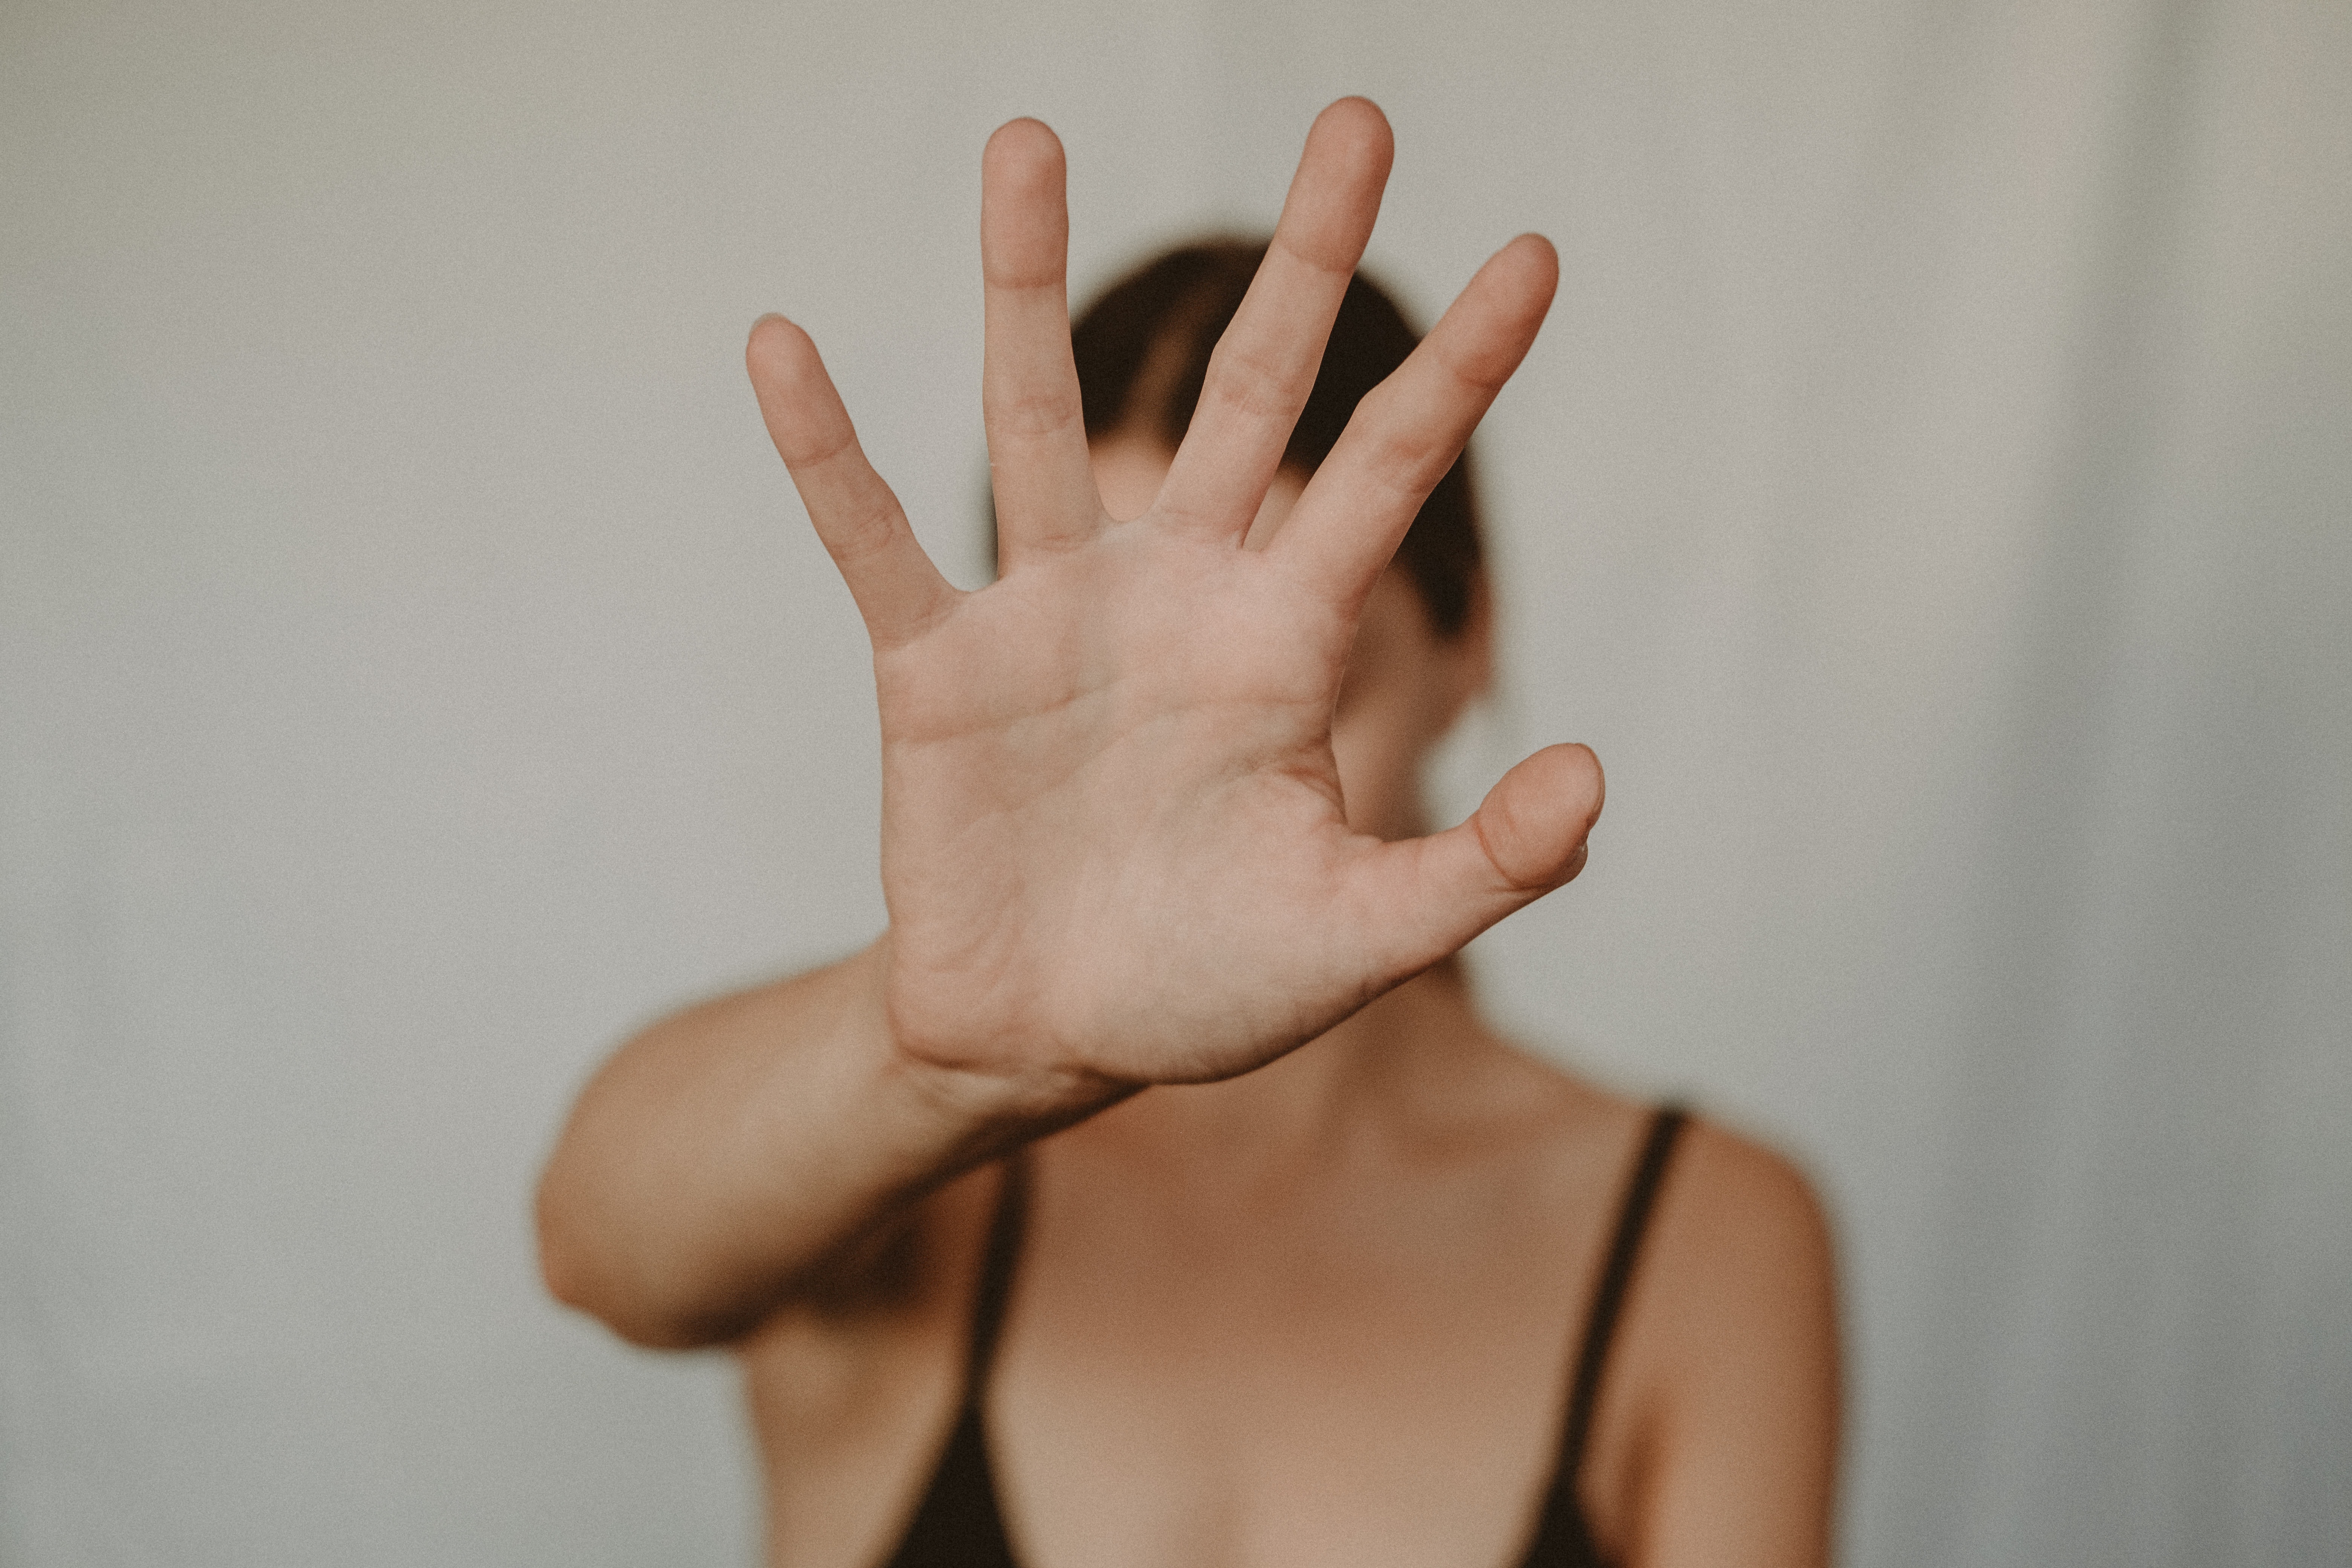 Coercive Control: What Is It and Where Can I Get Help?